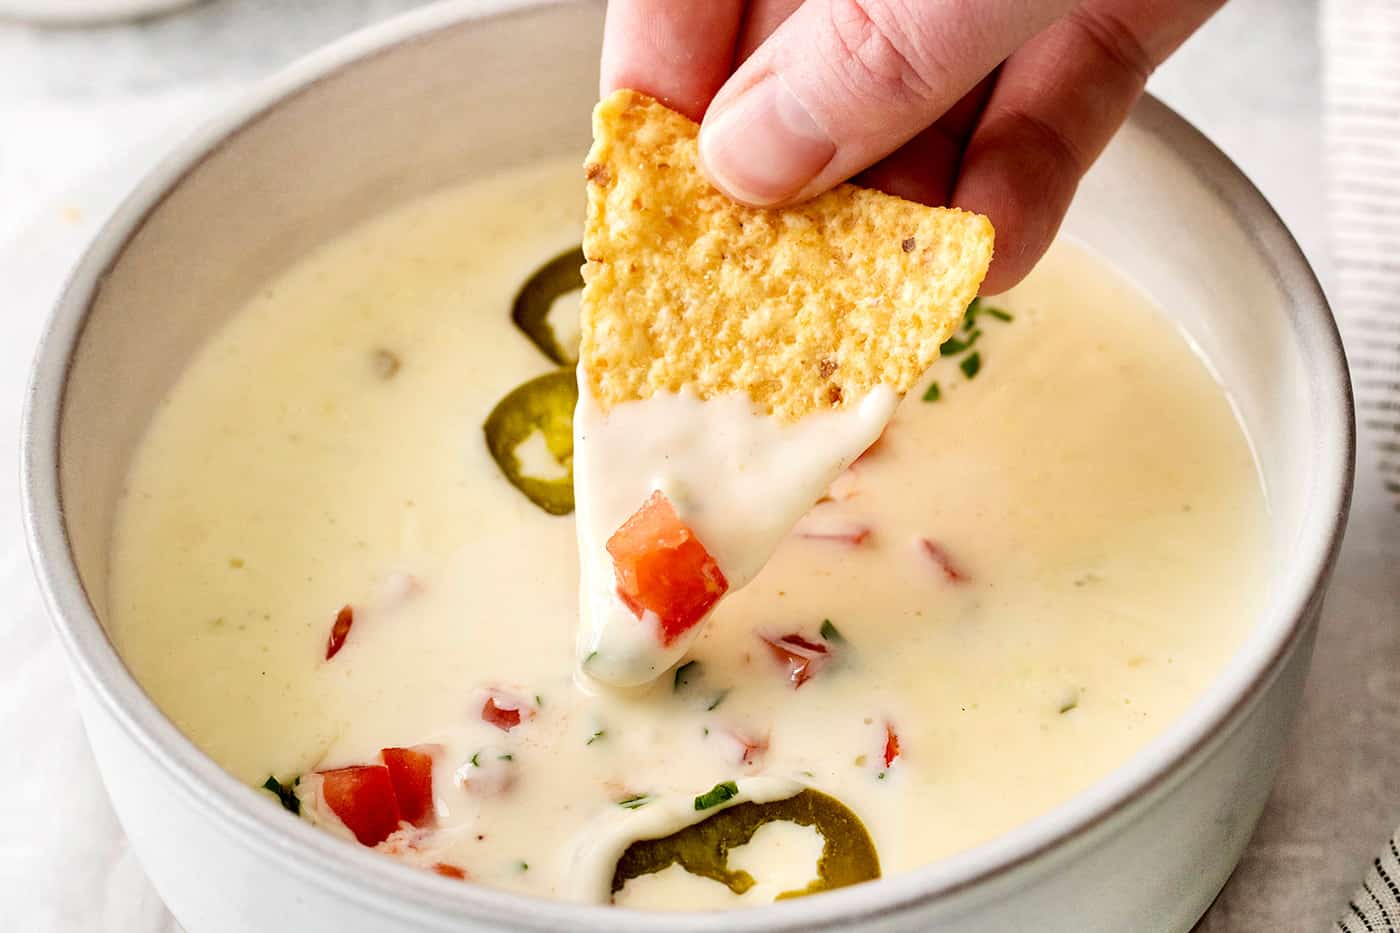 A hand dipping a chip into a bowl of queso blanco